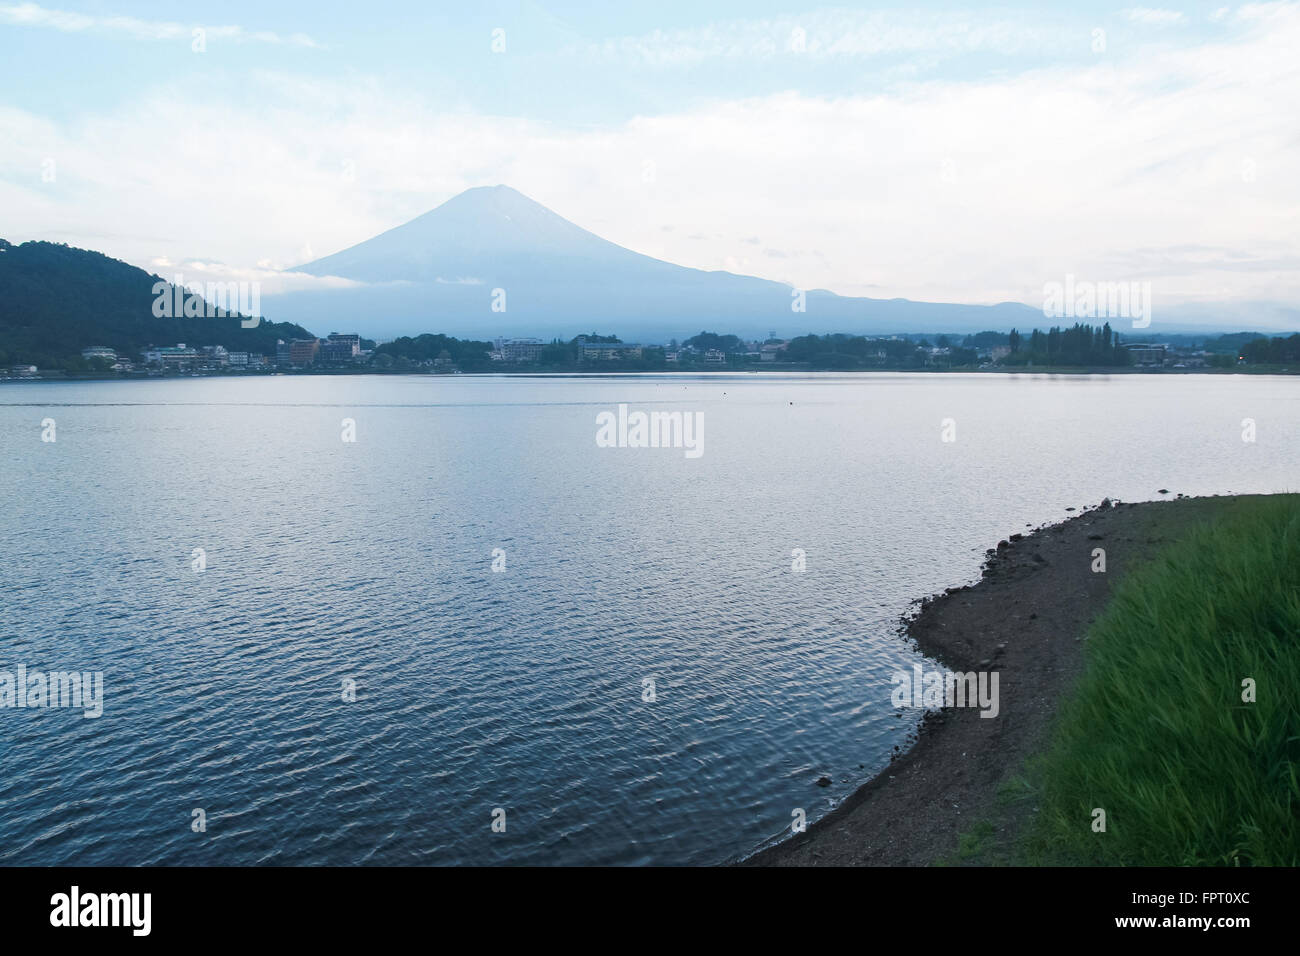 landscape of Mountain Fuji and a lake on the foot of it Stock Photo